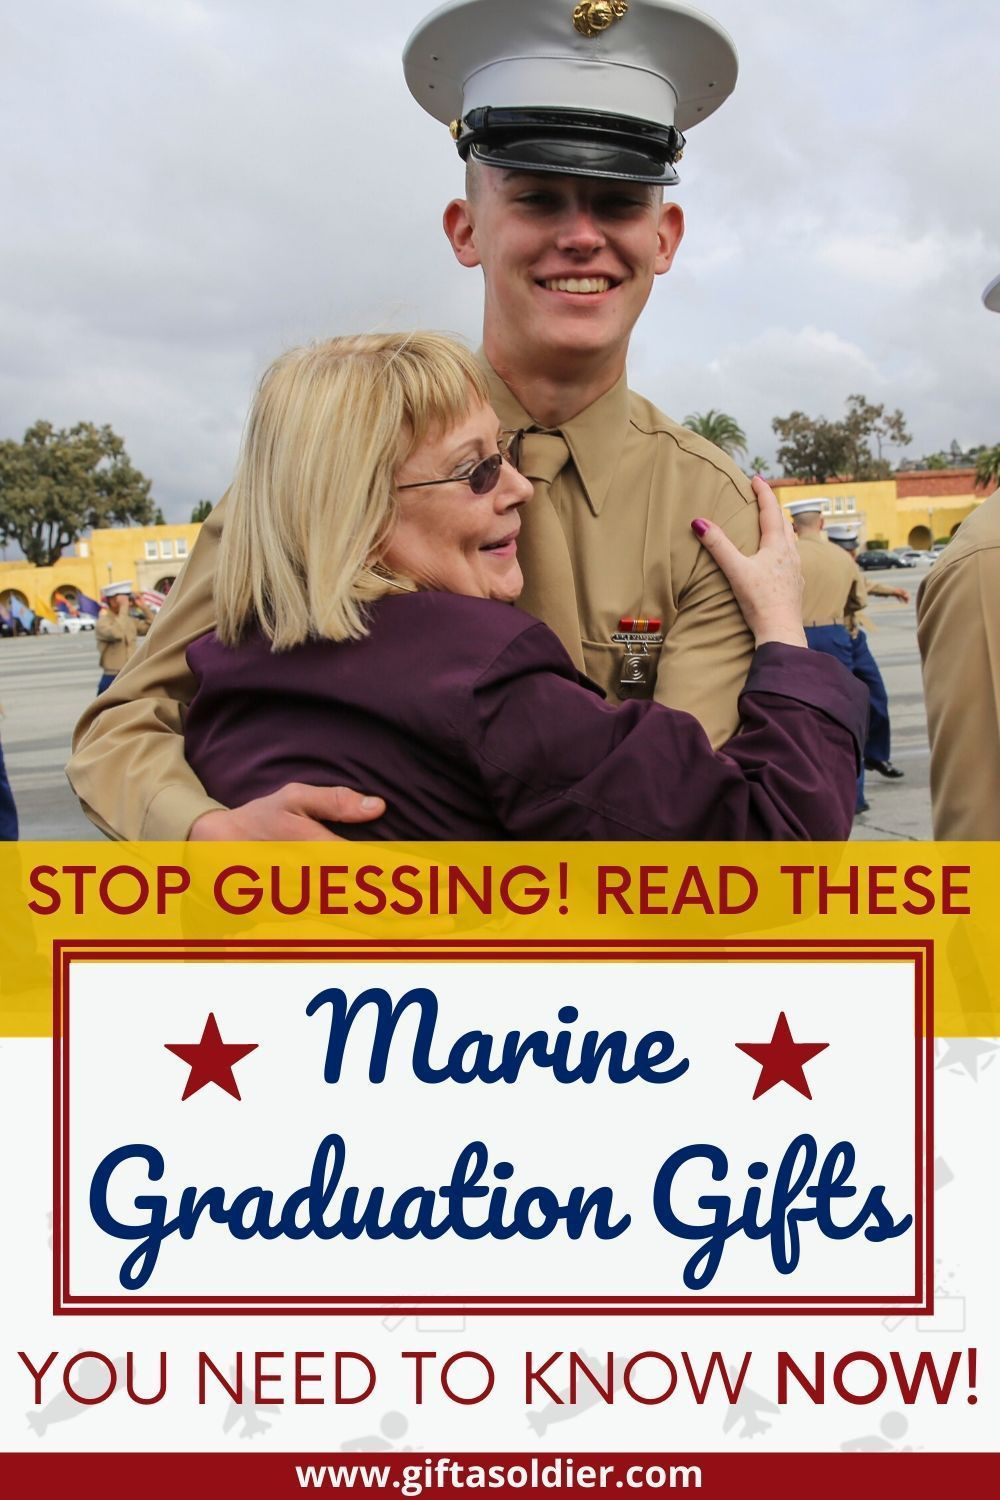 Gift Ideas For Marine Boot Camp Graduation
 20 Ideas to Gift For Marine Graduating Boot Camp in 2020